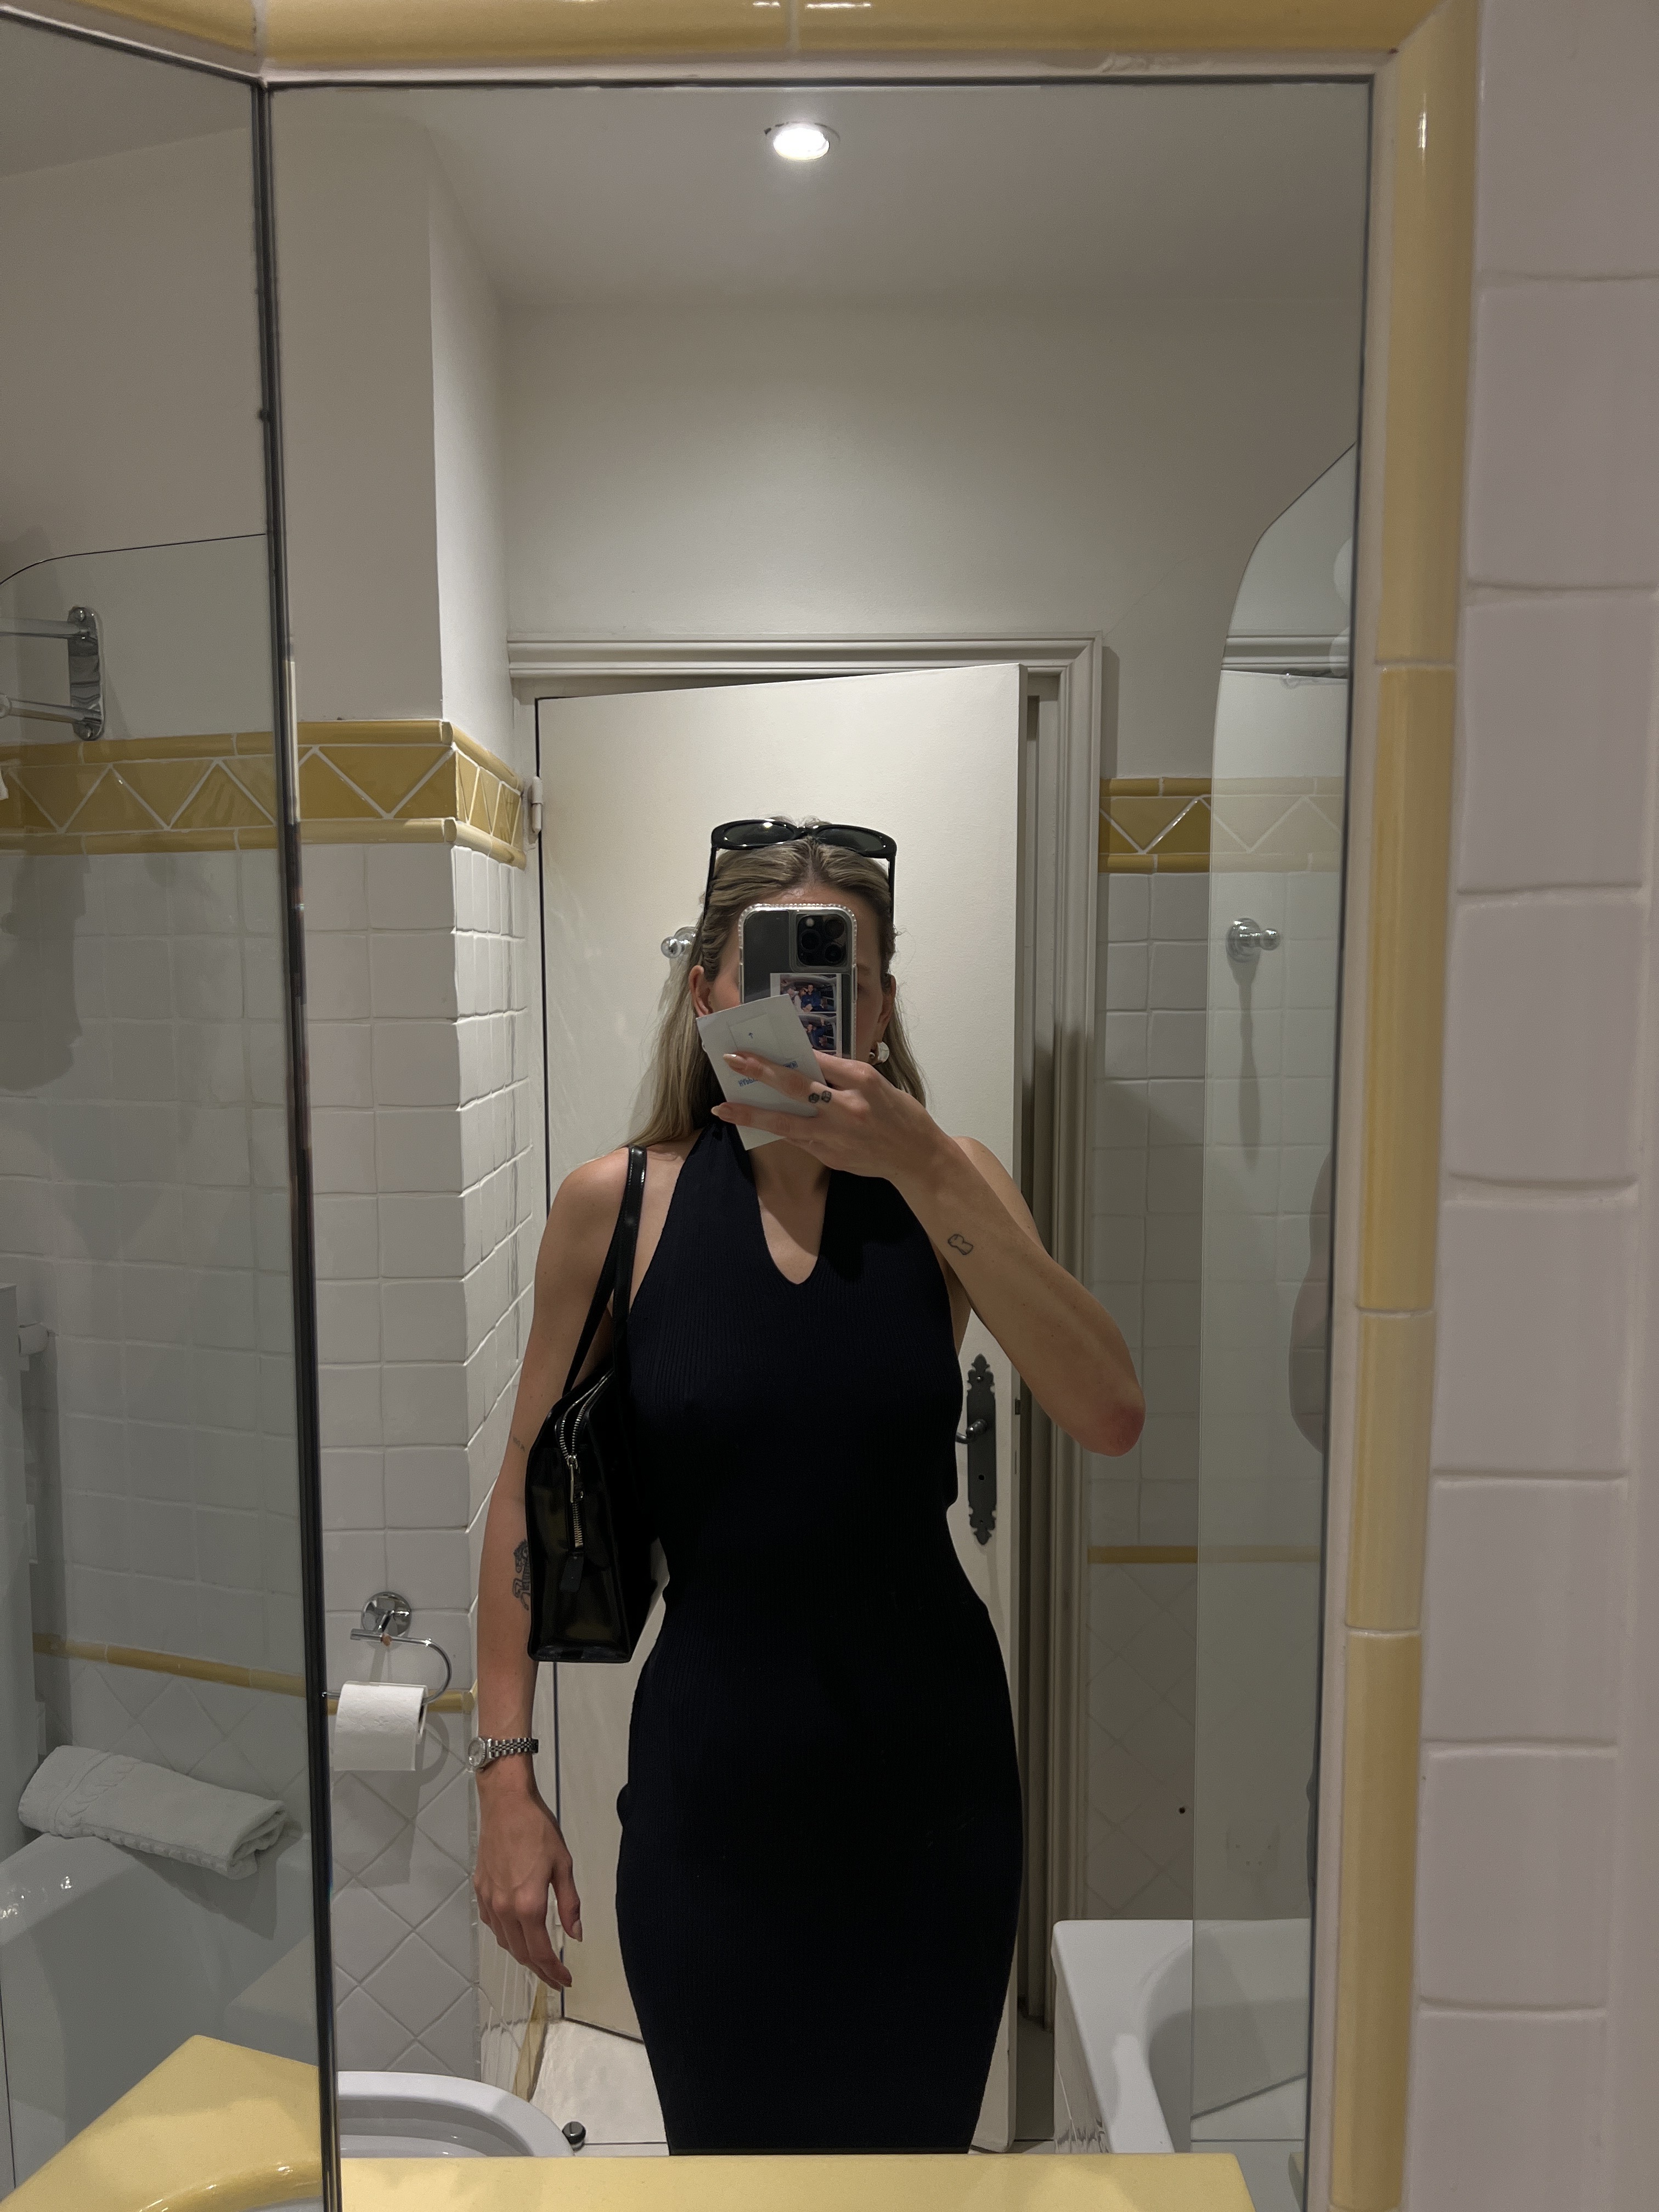 Eliza Huber in a mirror selfie wearing a navy blue halter dress with a black bag and sunglasses.